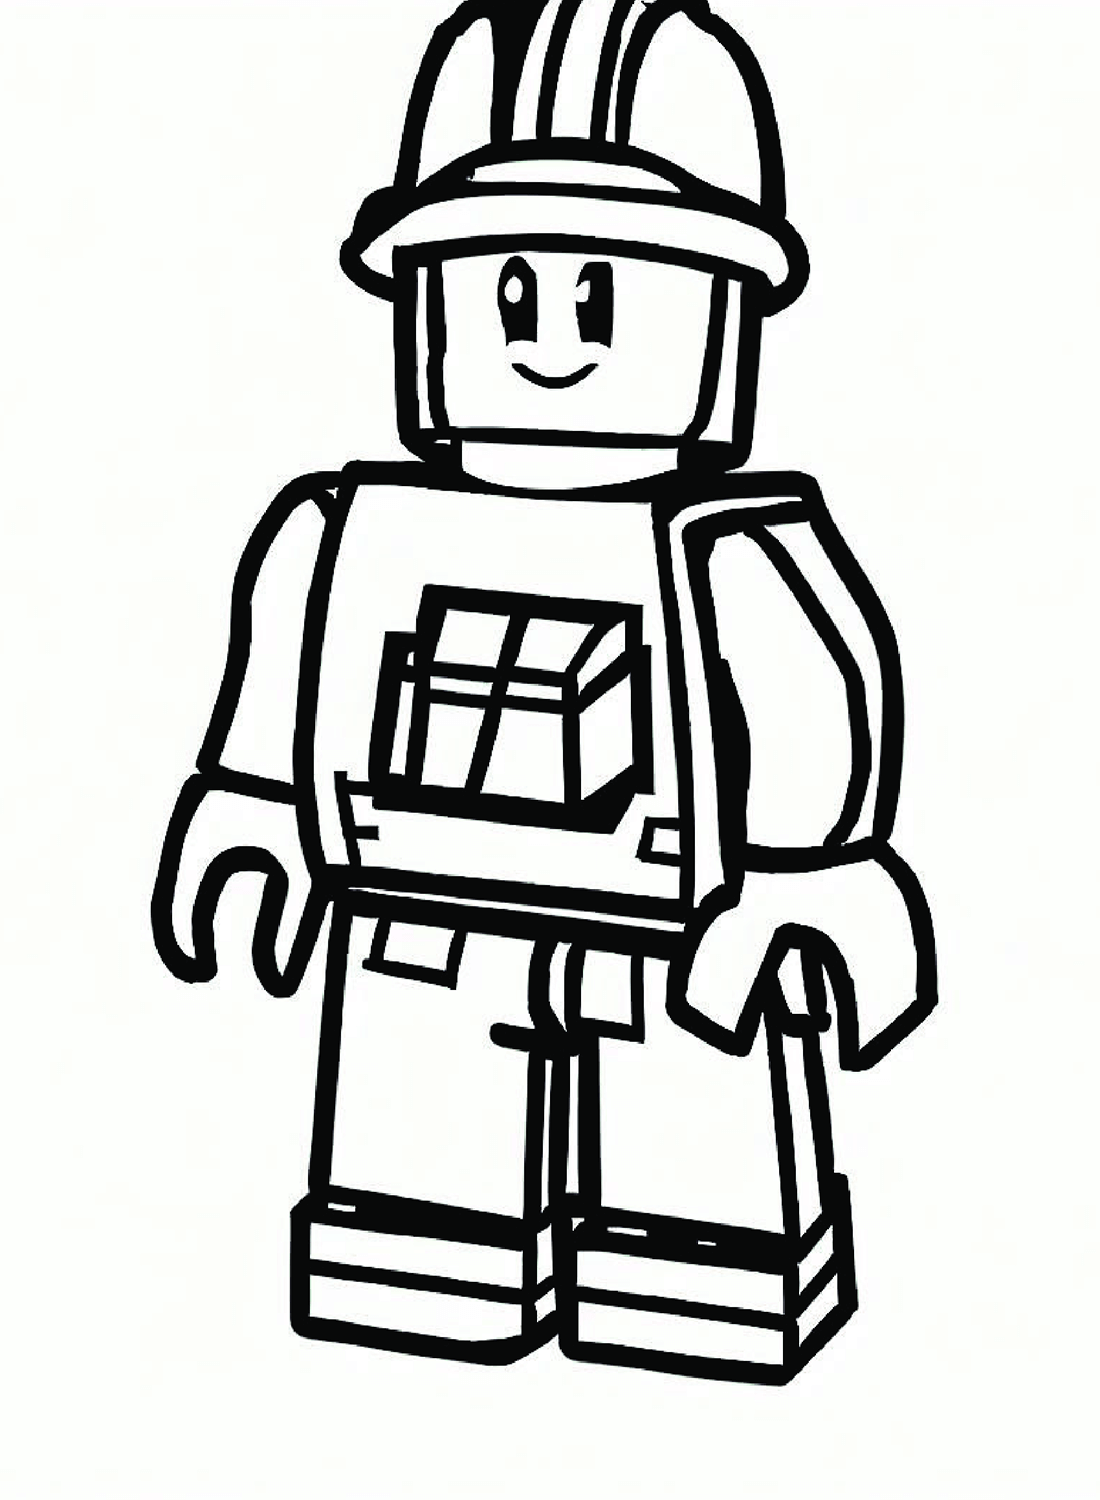 Coloring Pages Roblox from Roblox